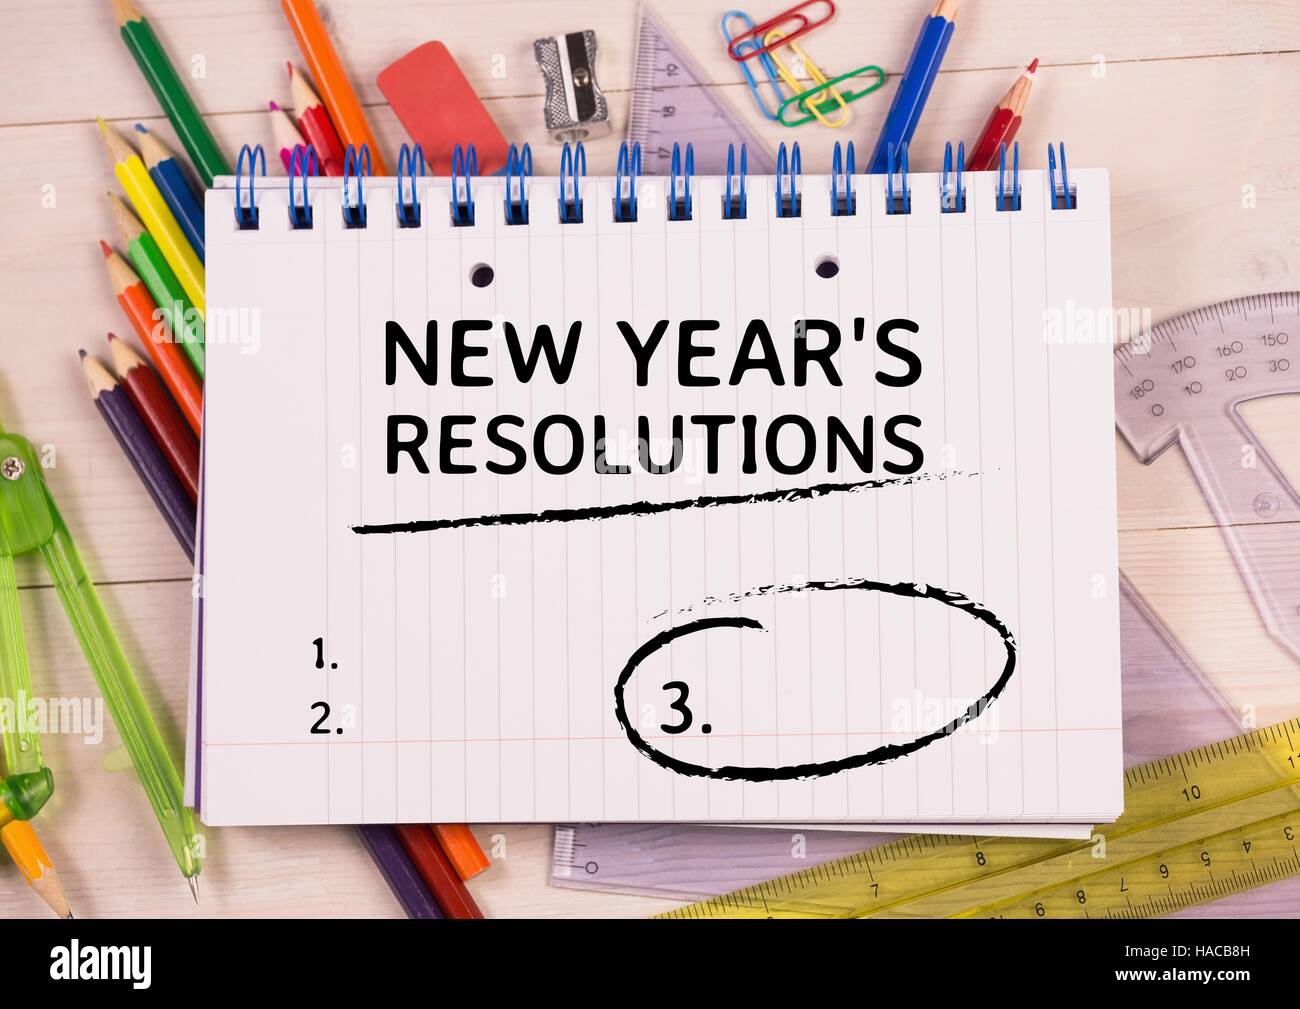 New year resolution goals written on spiral diary Stock Photo